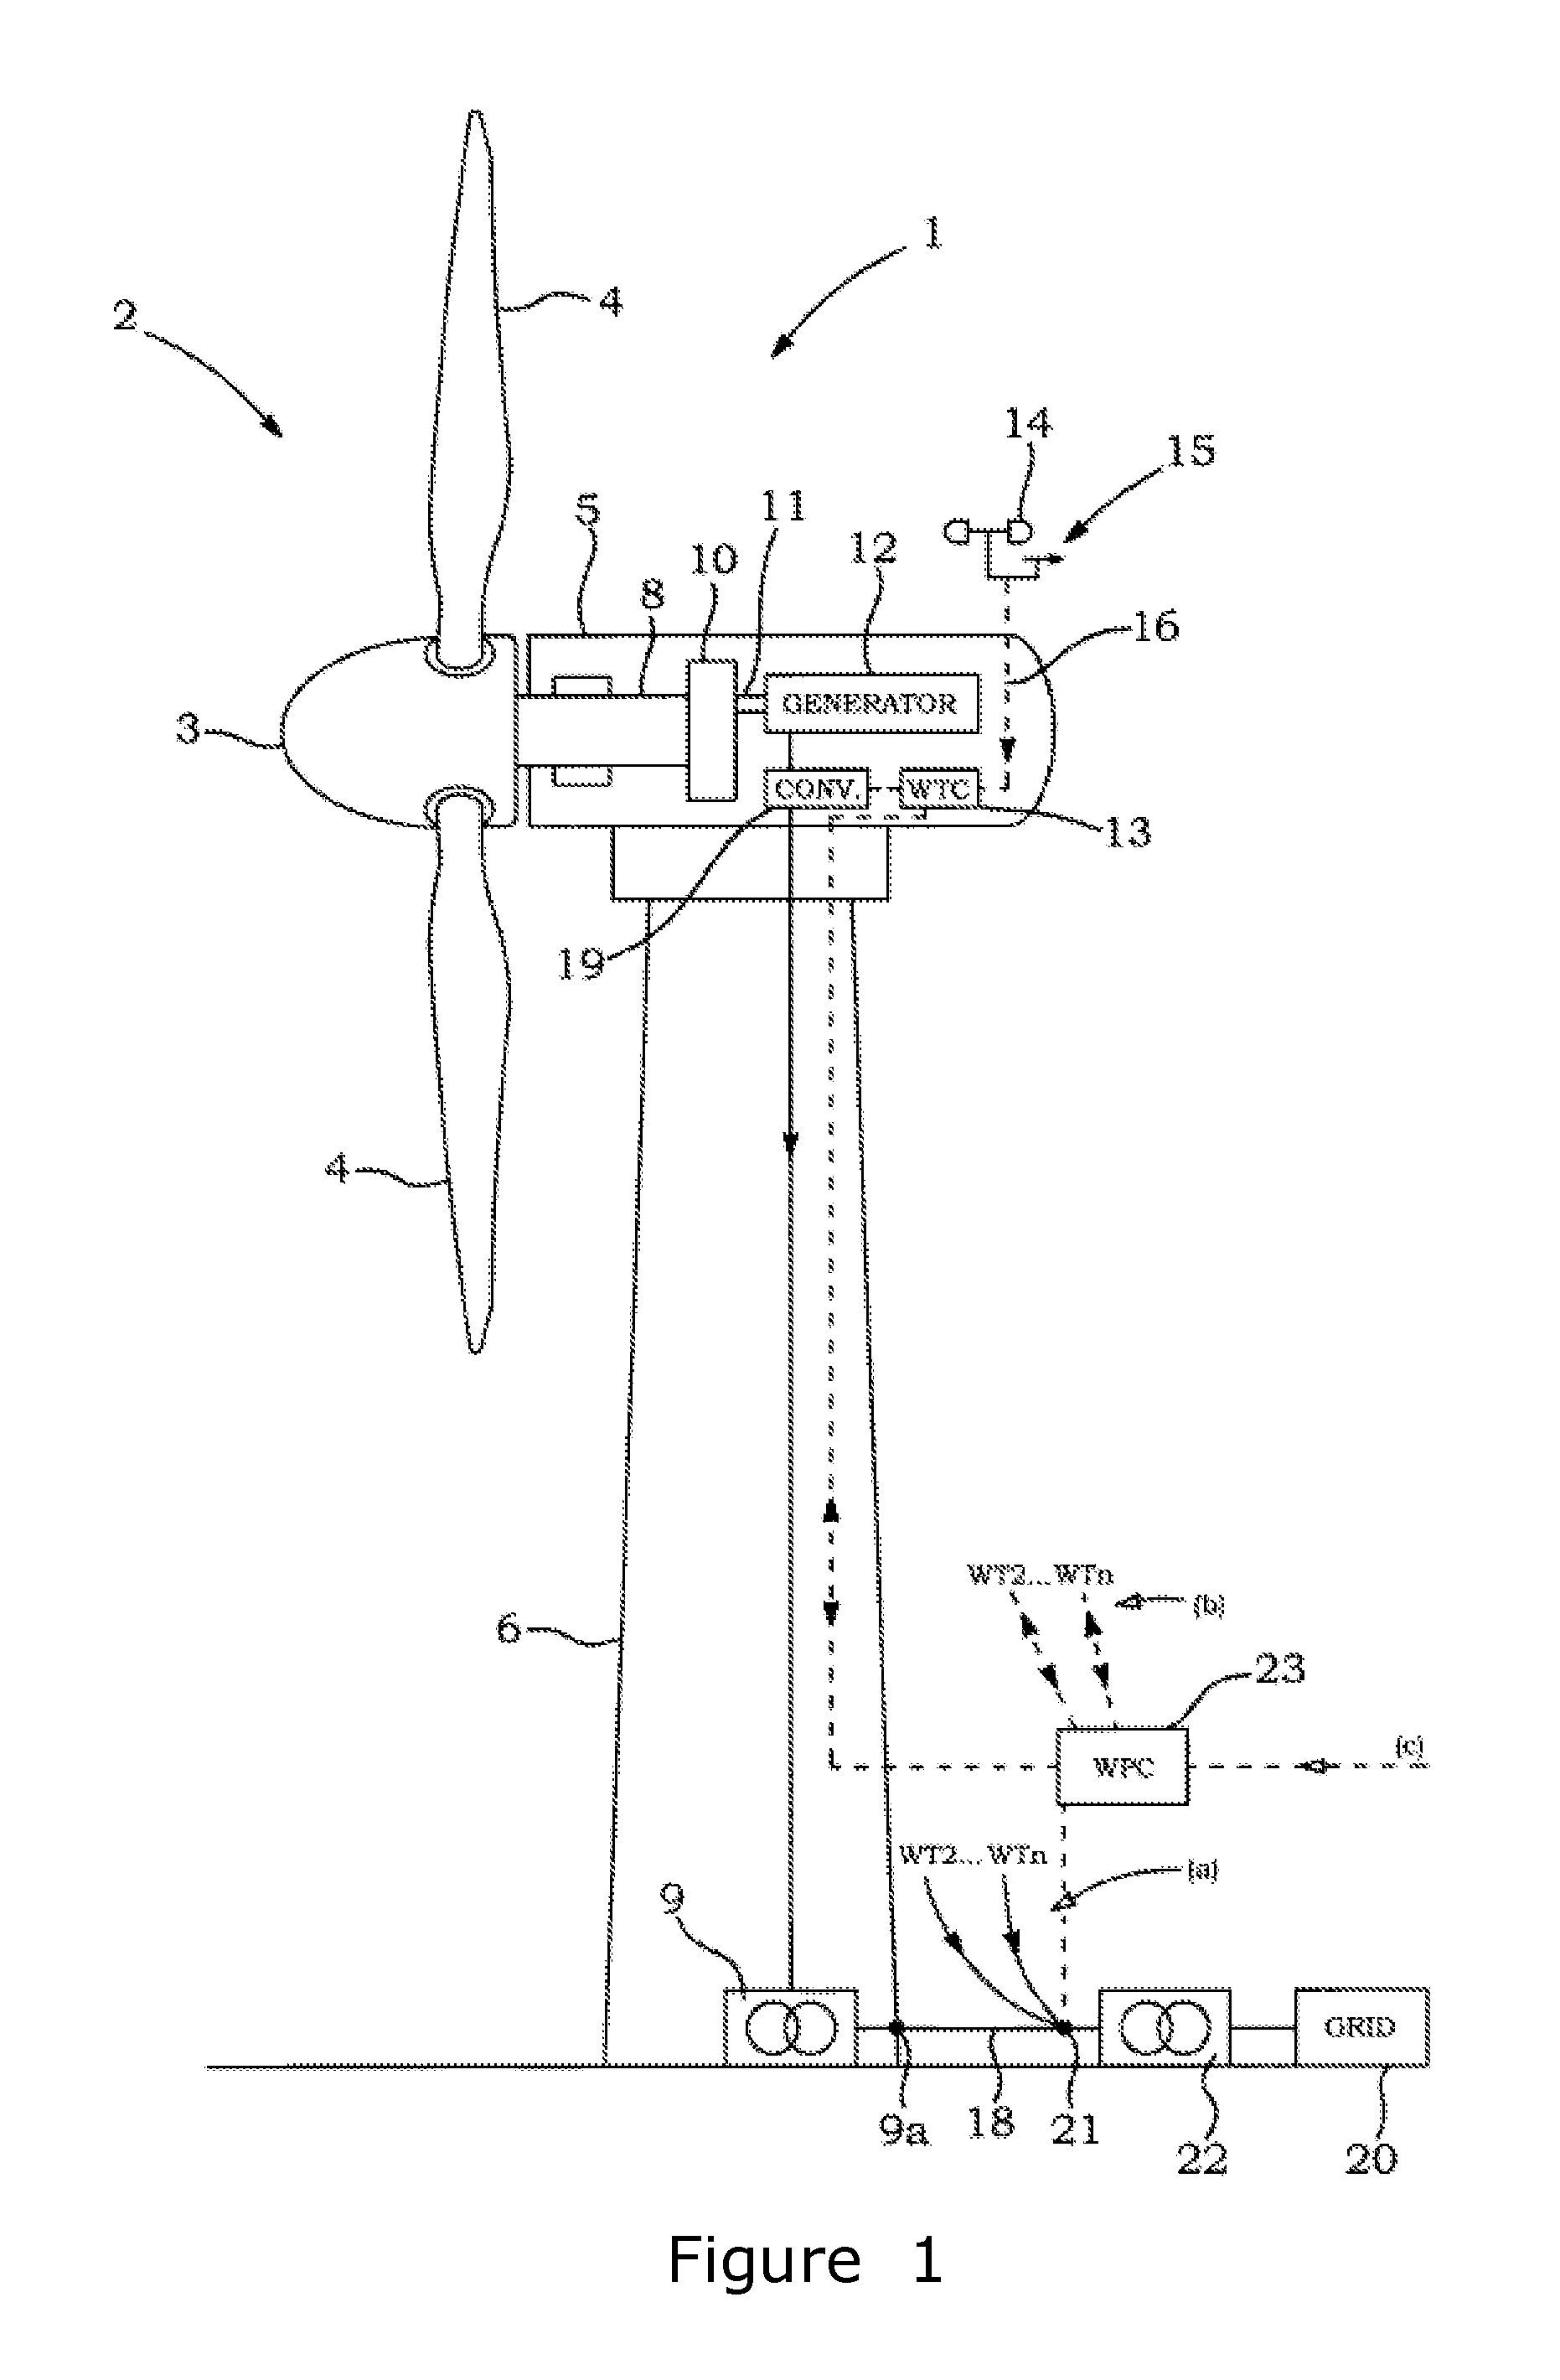 Reconfiguration of the reactive power loop of a wind power plant